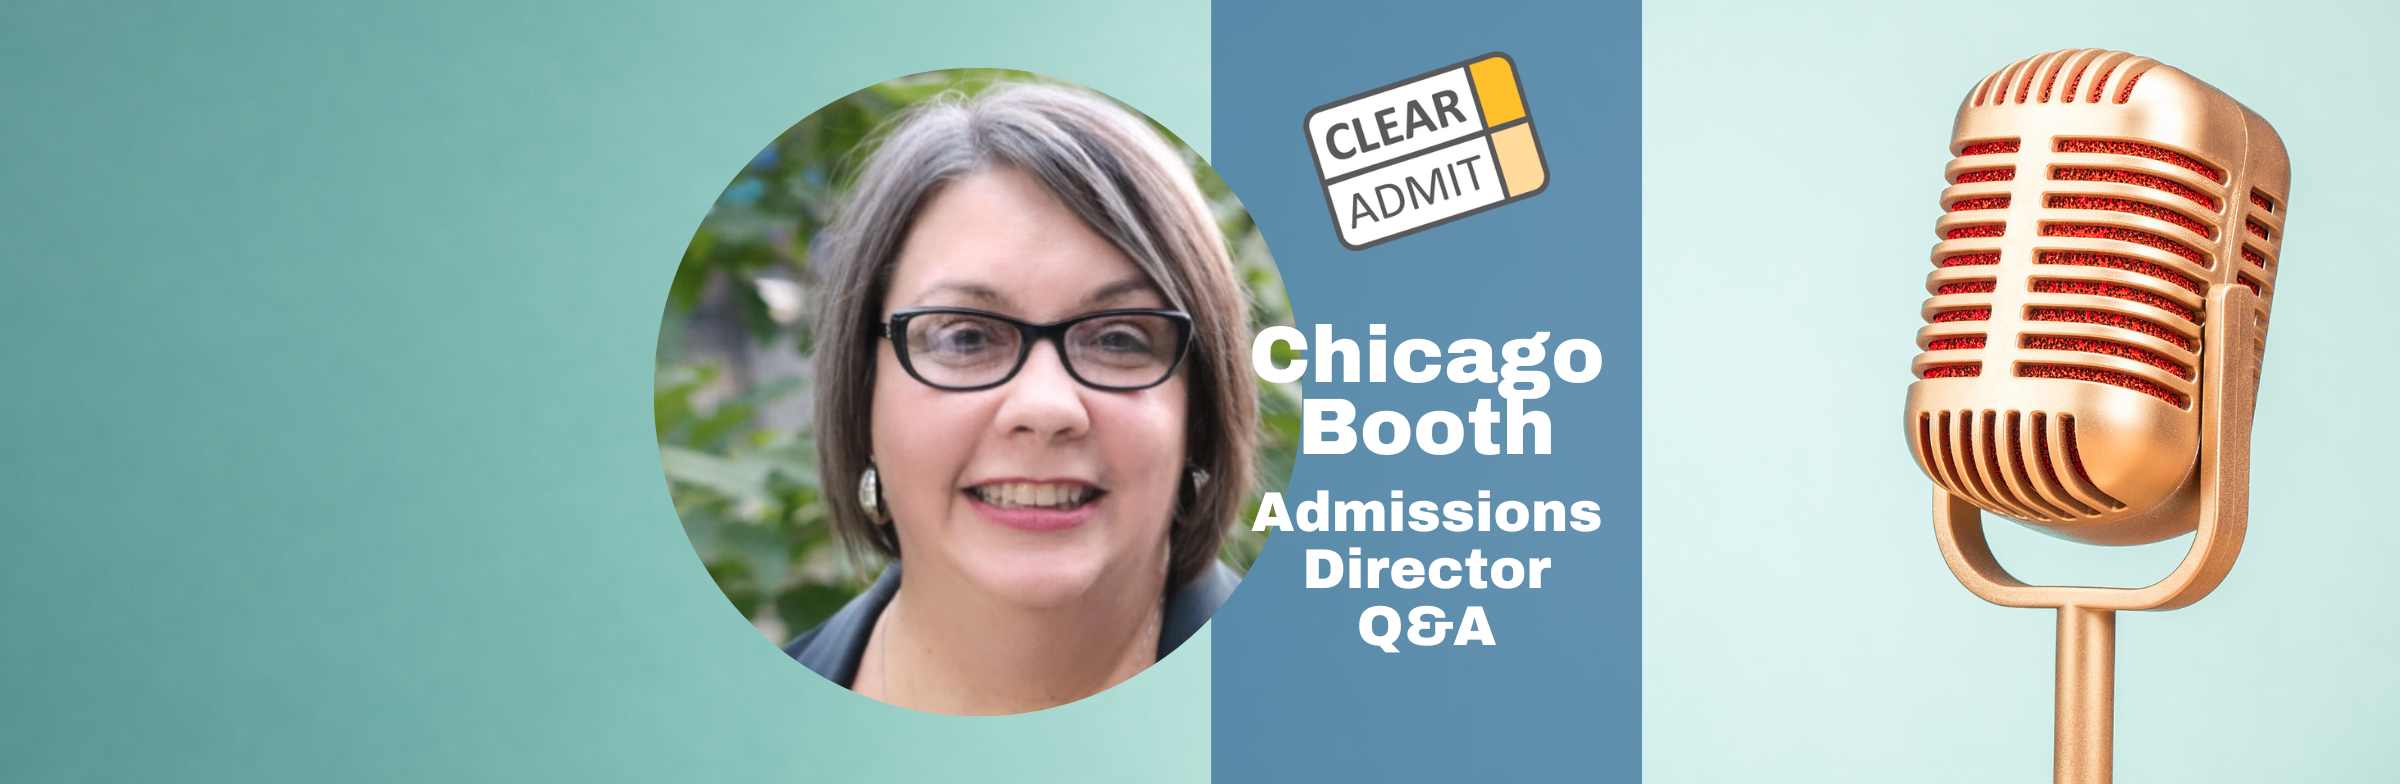 Chicago Booth—MBA Interview Questions and How to Prepare